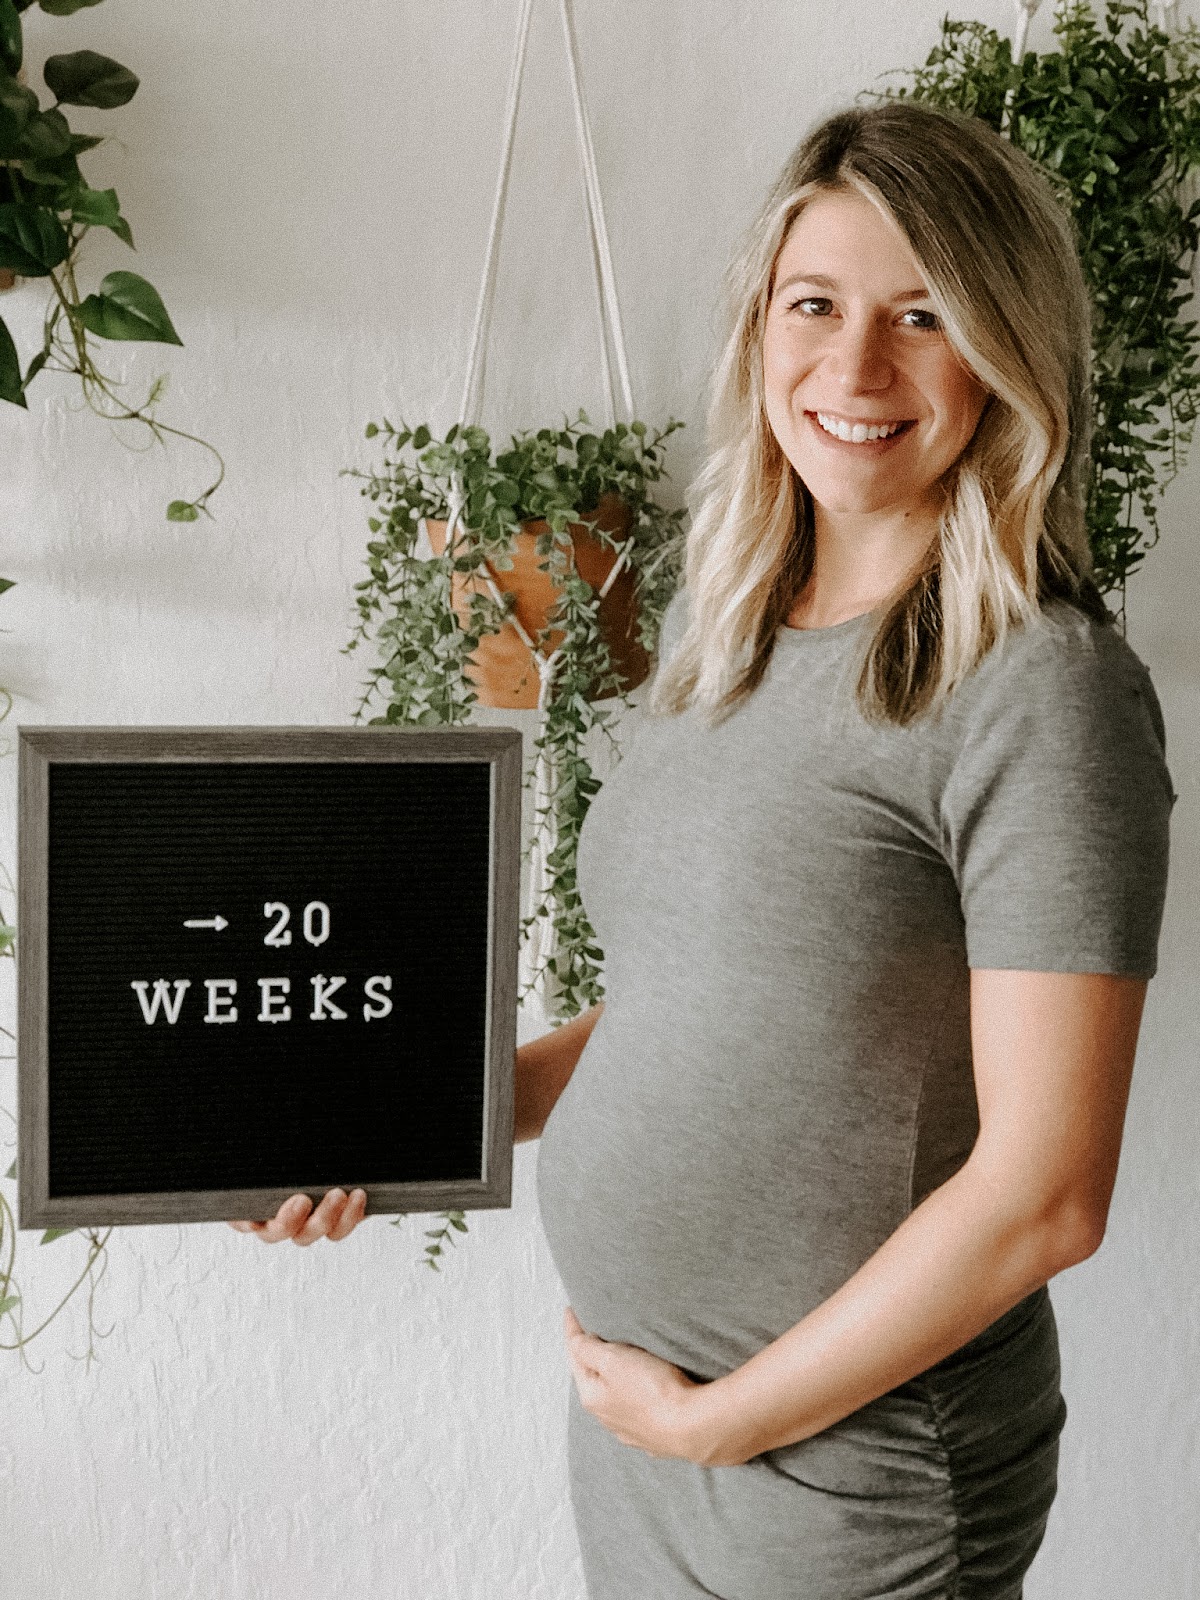 Hello Pregnancy: Second trimester is full of fun “firsts” as your body changes